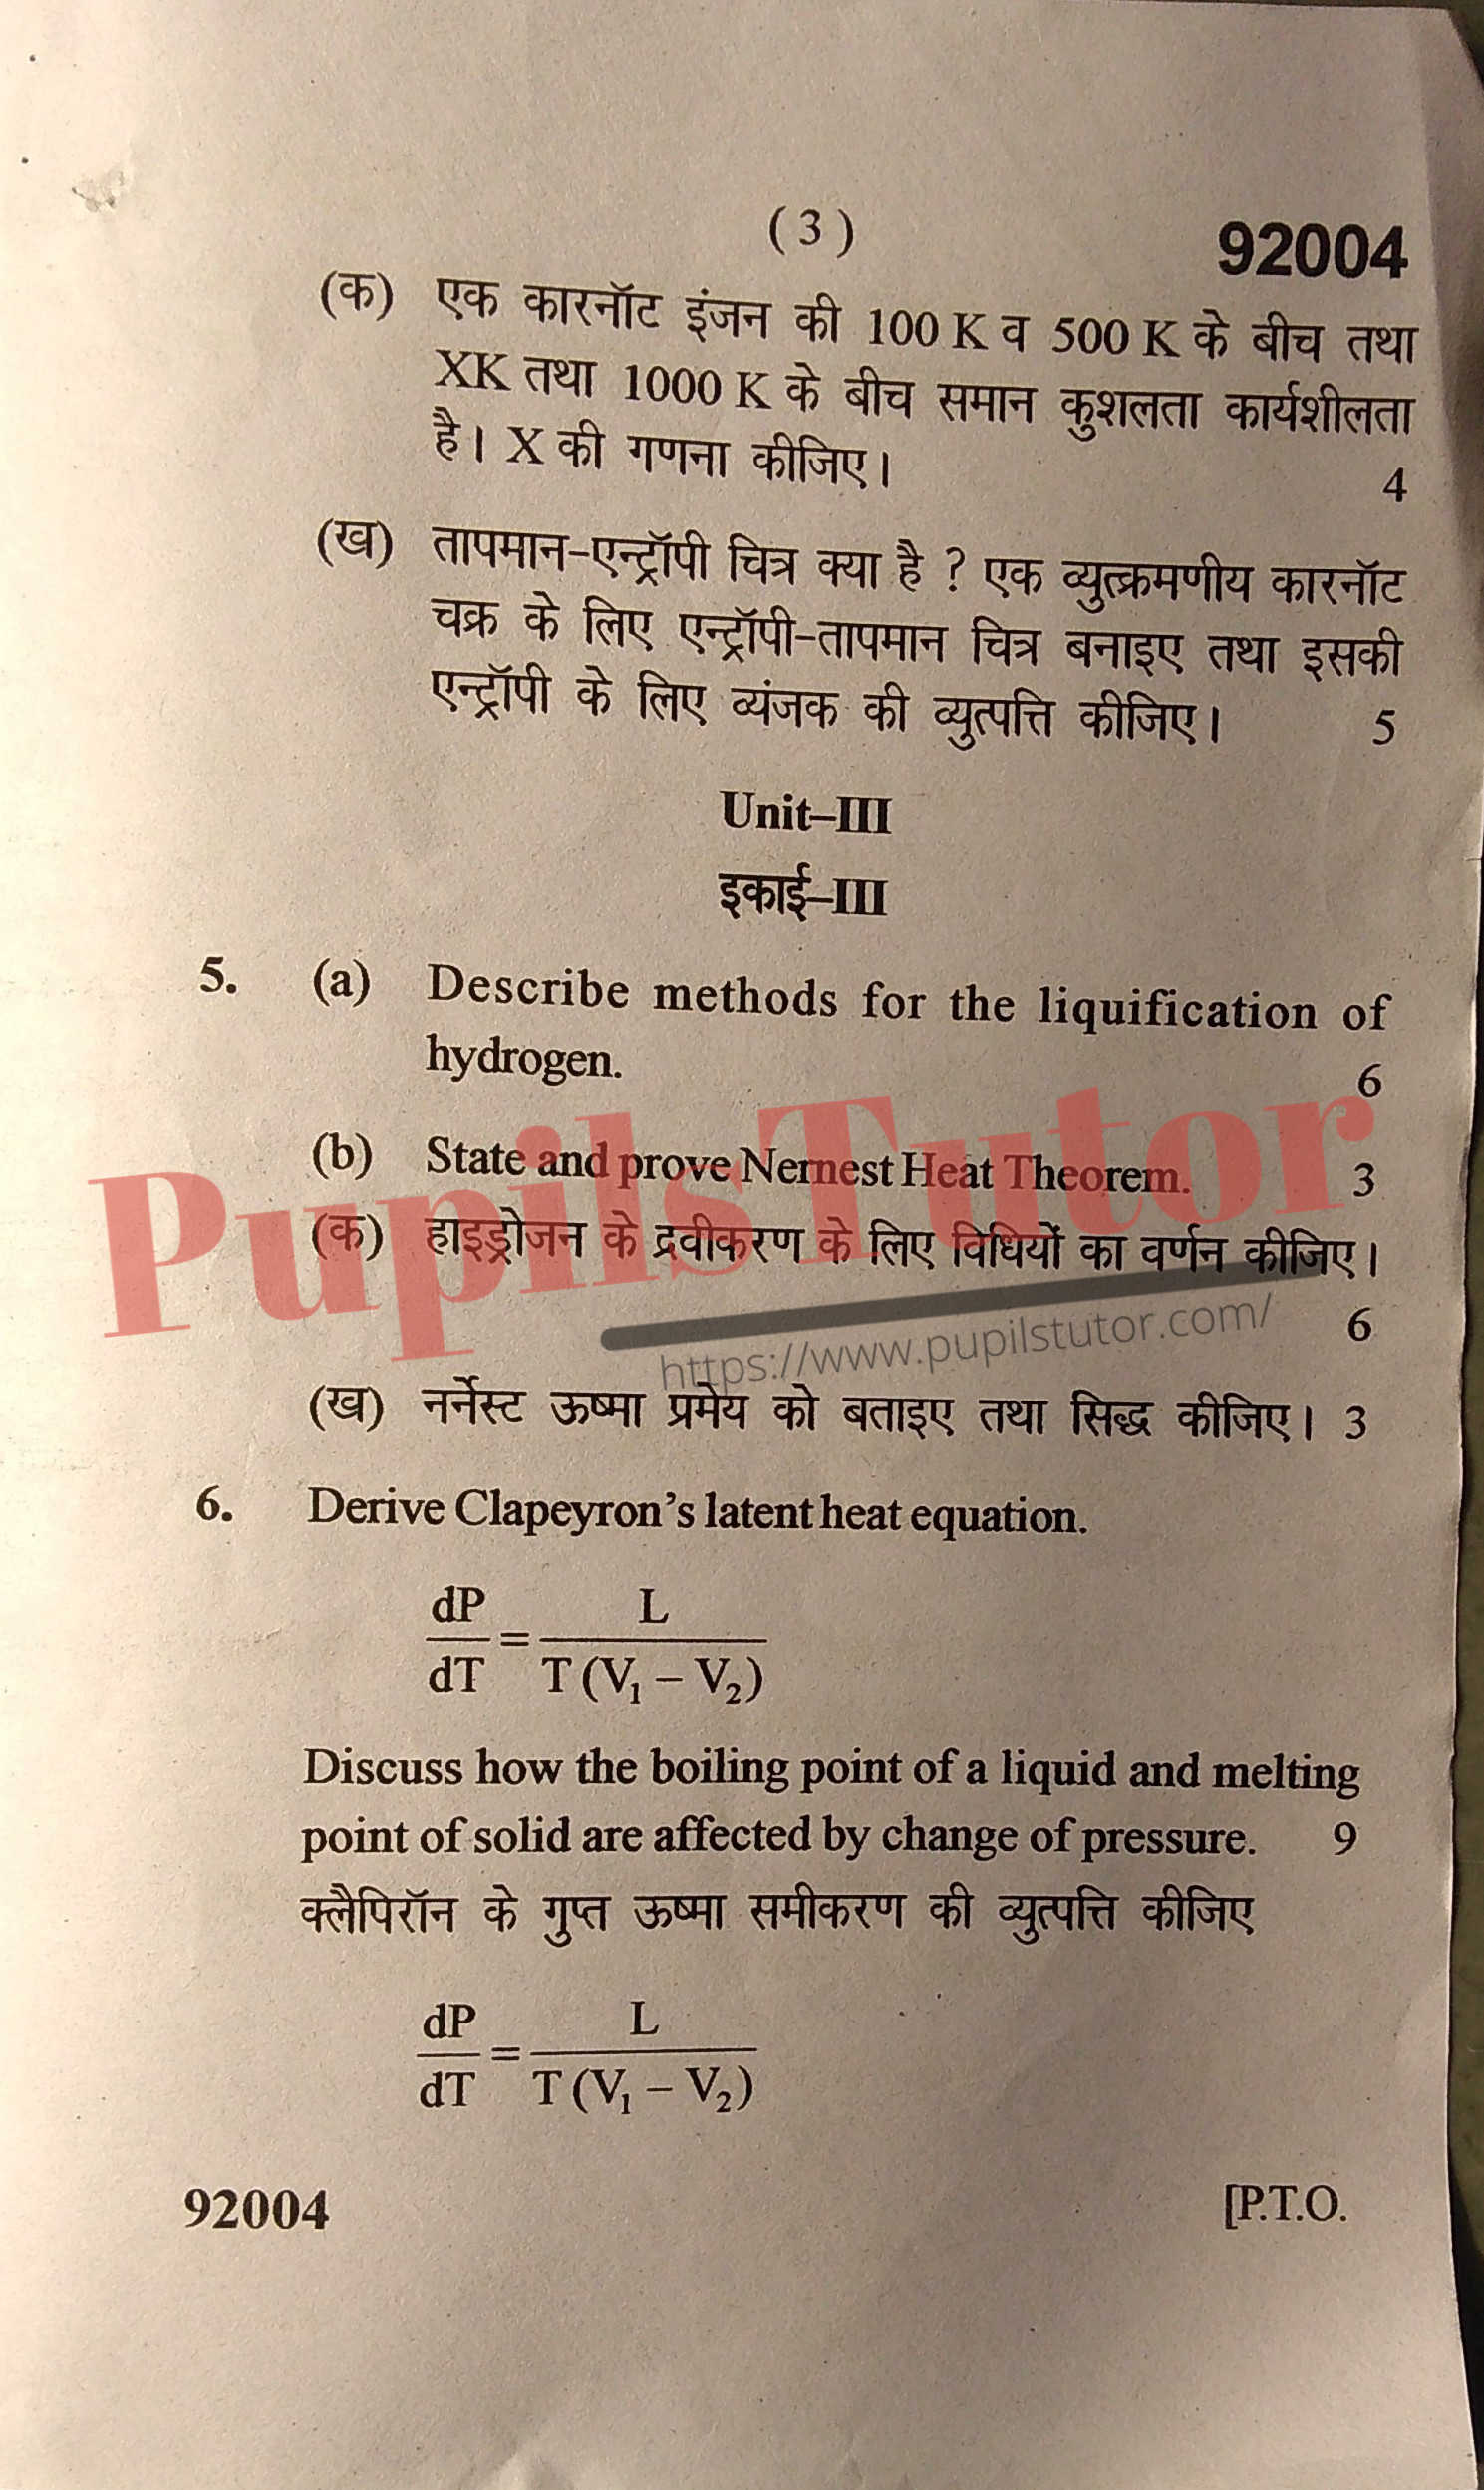 Free Download PDF Of M.D. University B.Sc. [Physics] Third Semester Latest Question Paper For Computer Programming And Thermodynamics Subject (Page 3) - https://www.pupilstutor.com